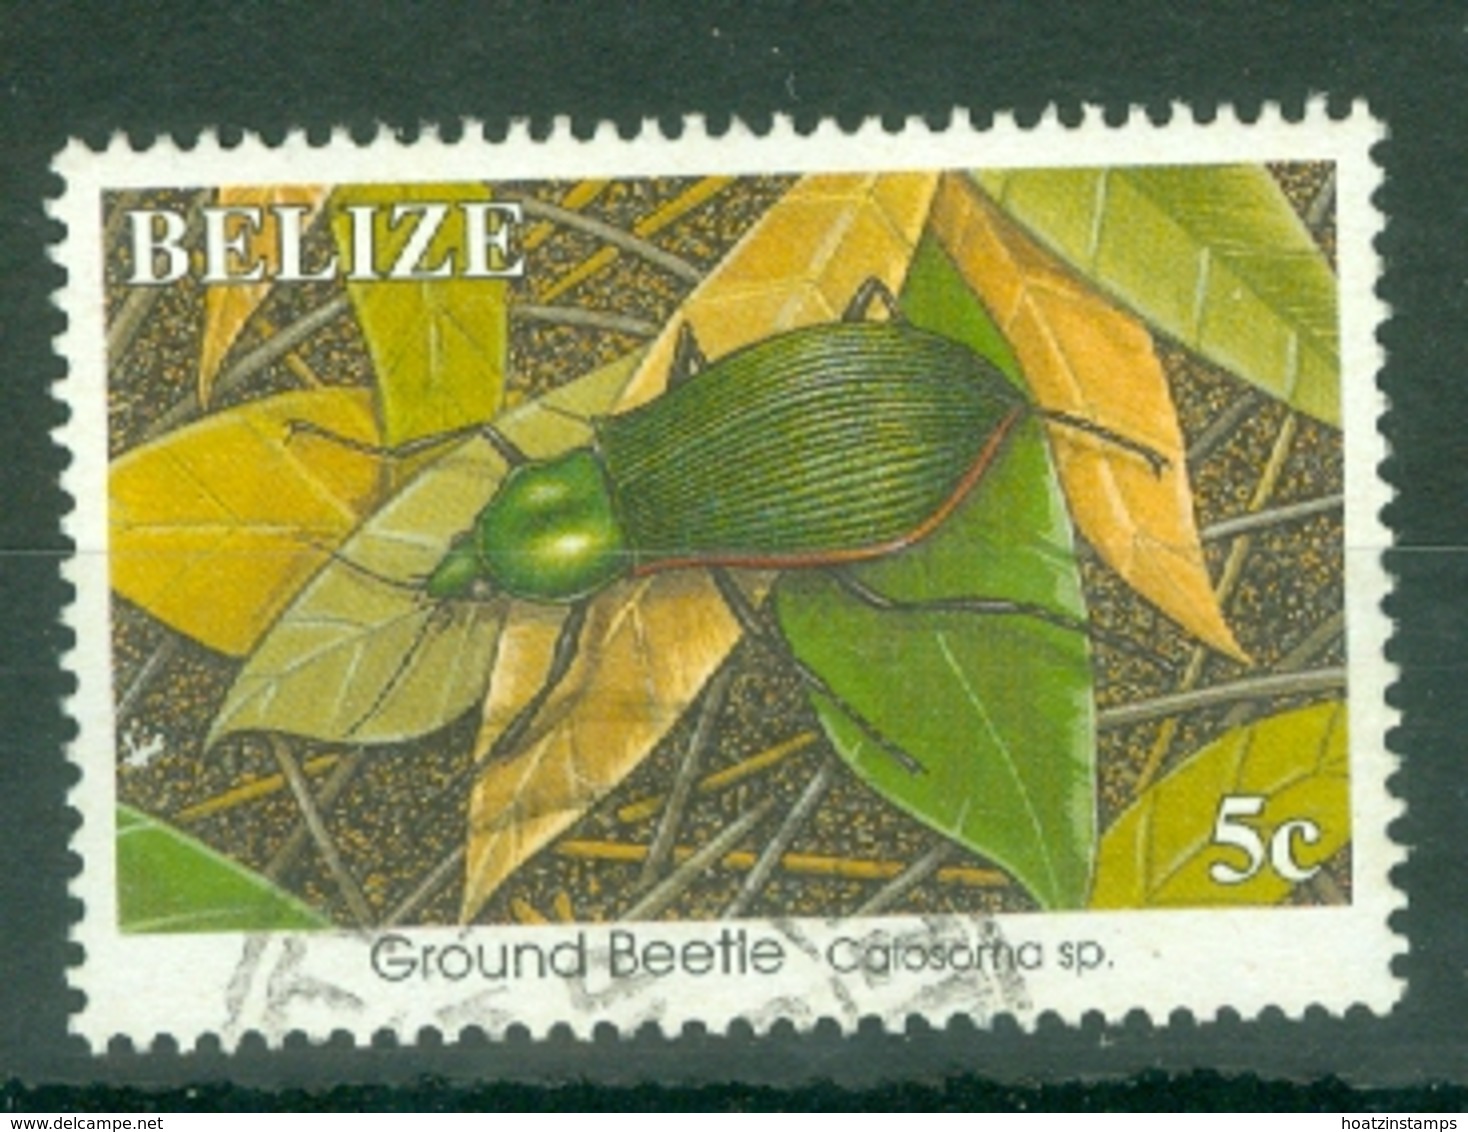 Belize: 1995/96   Insects   SG1170A    5c  Used - Belize (1973-...)